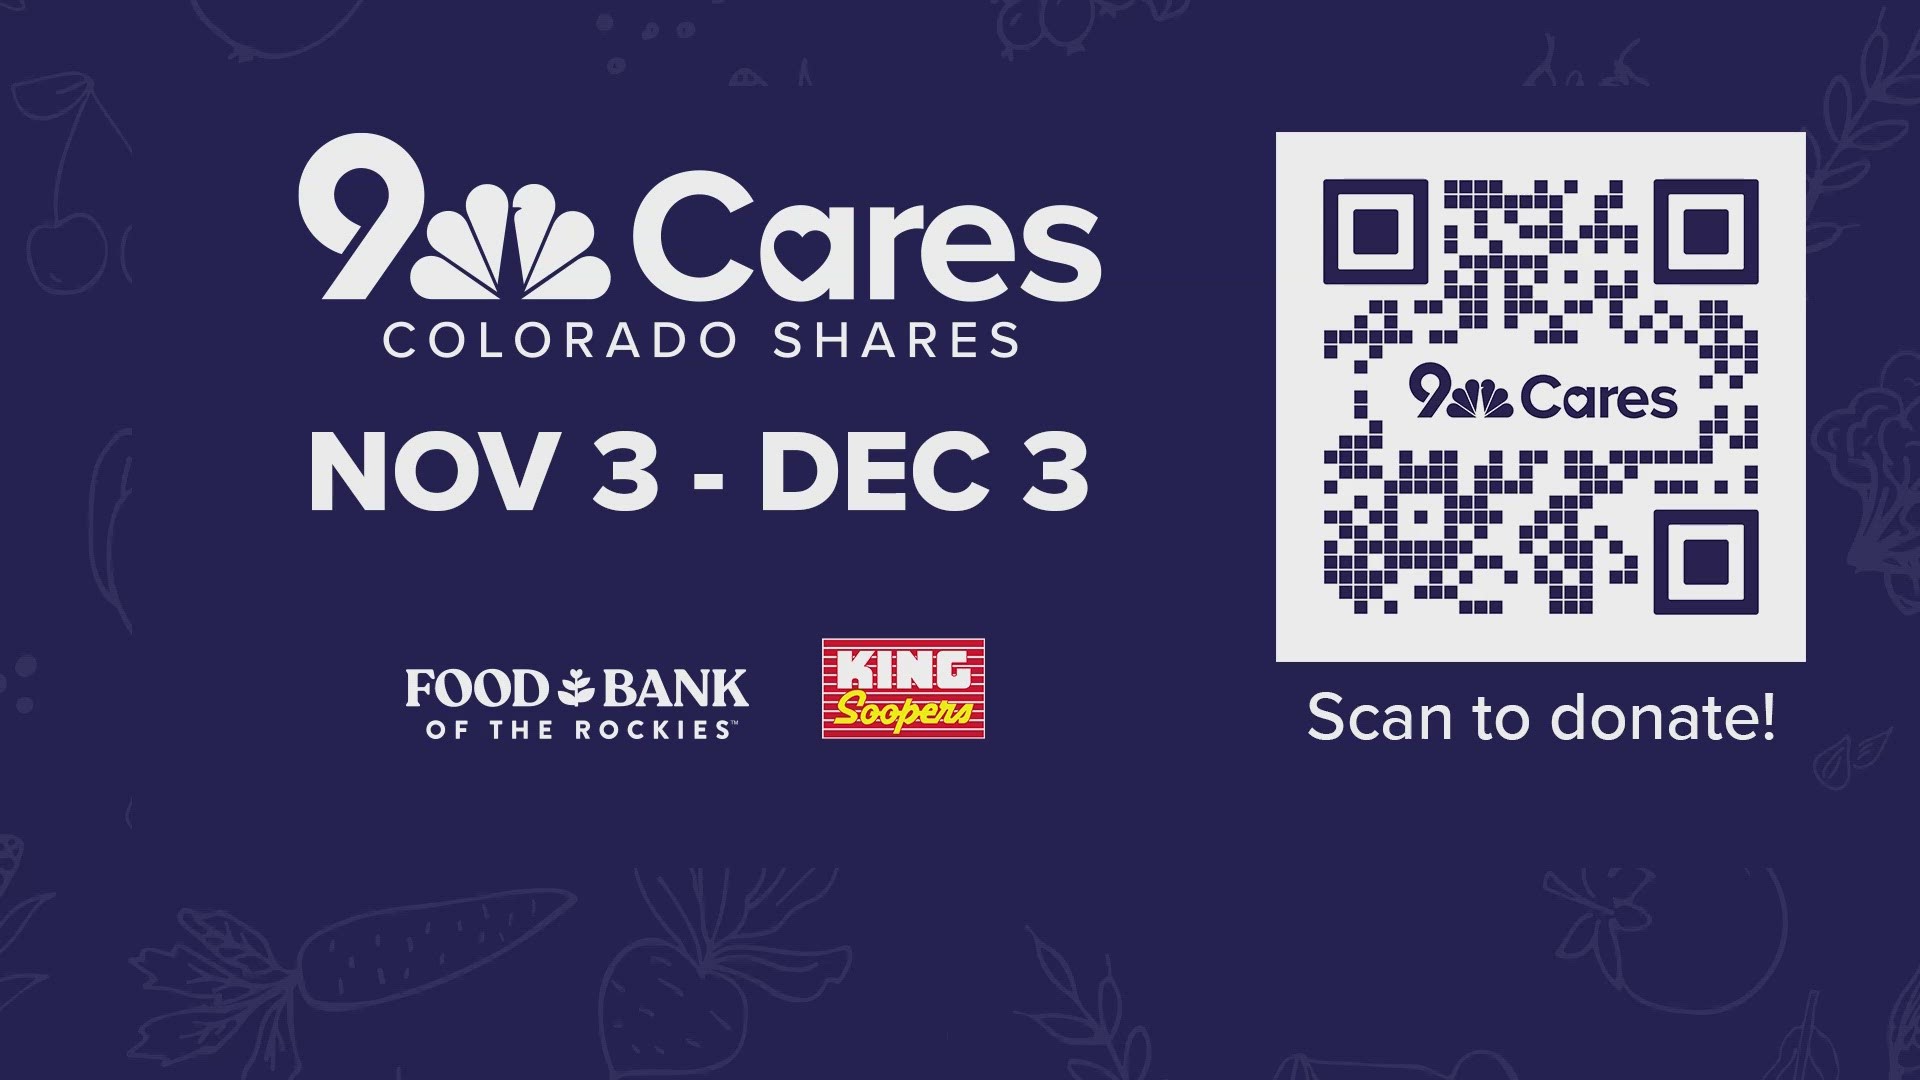 The 42nd annual 9Cares Colorado Shares Food Drive continues the fall holiday tradition of helping our neighbors in need by filling food banks and pantries.